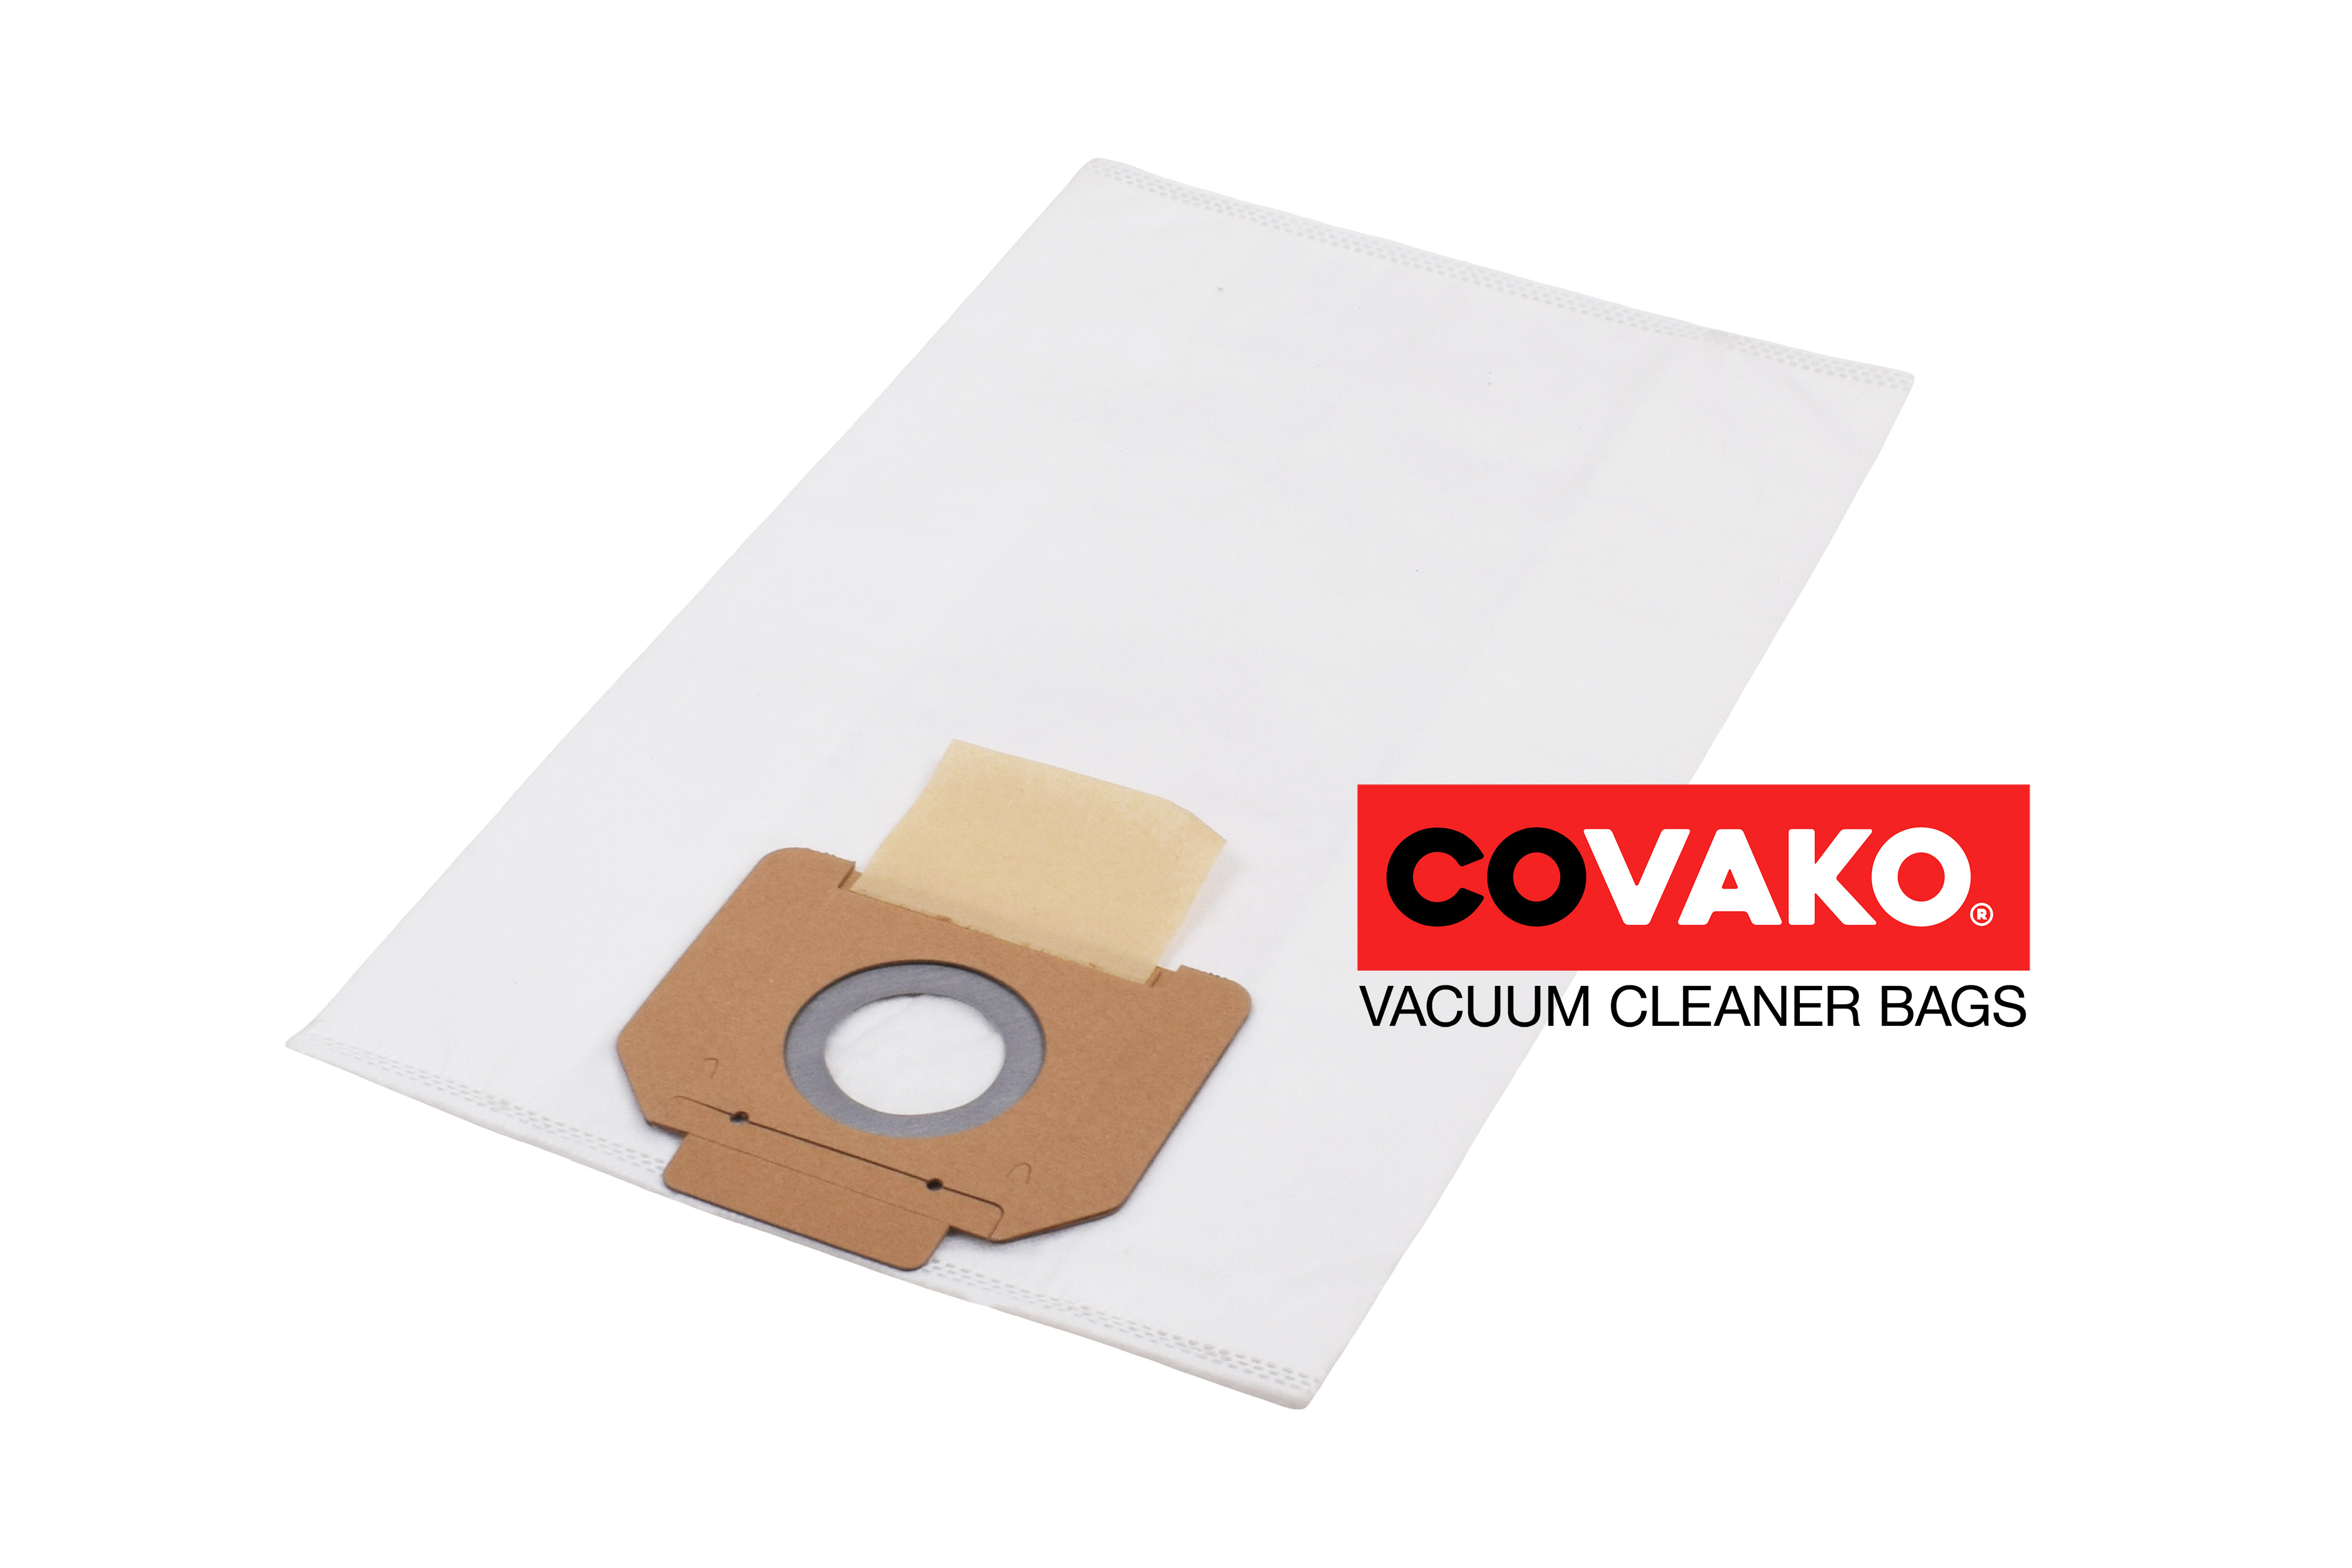 Gansow YP 1400/20 / Synthesis - Gansow vacuum cleaner bags